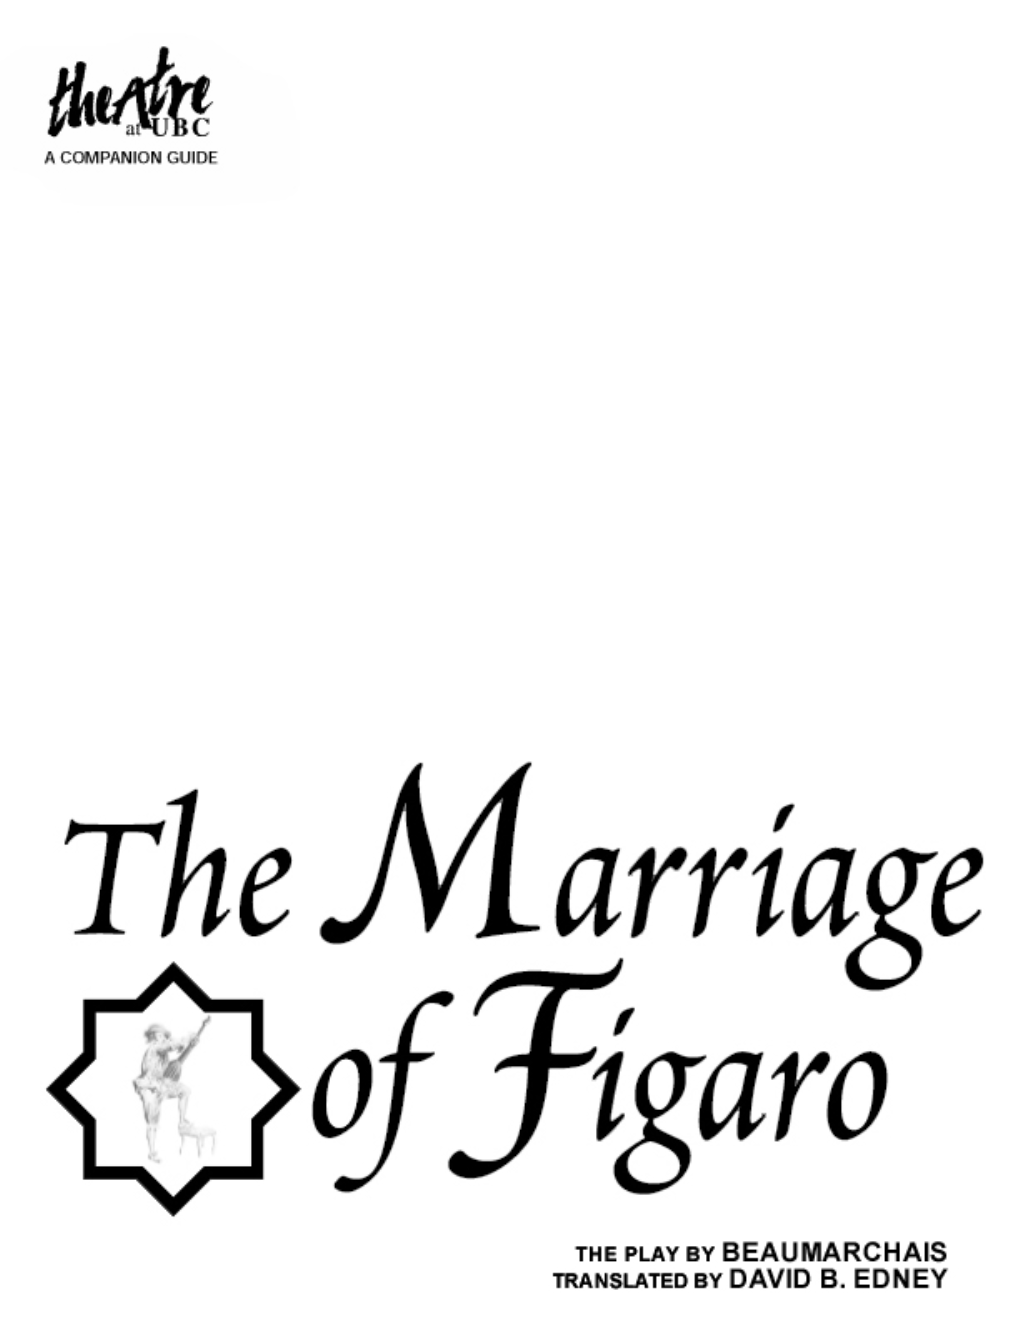 The Marriage of Figaroigaro by Pierre-Augustin Caron De Beaumarchais Translated by David B